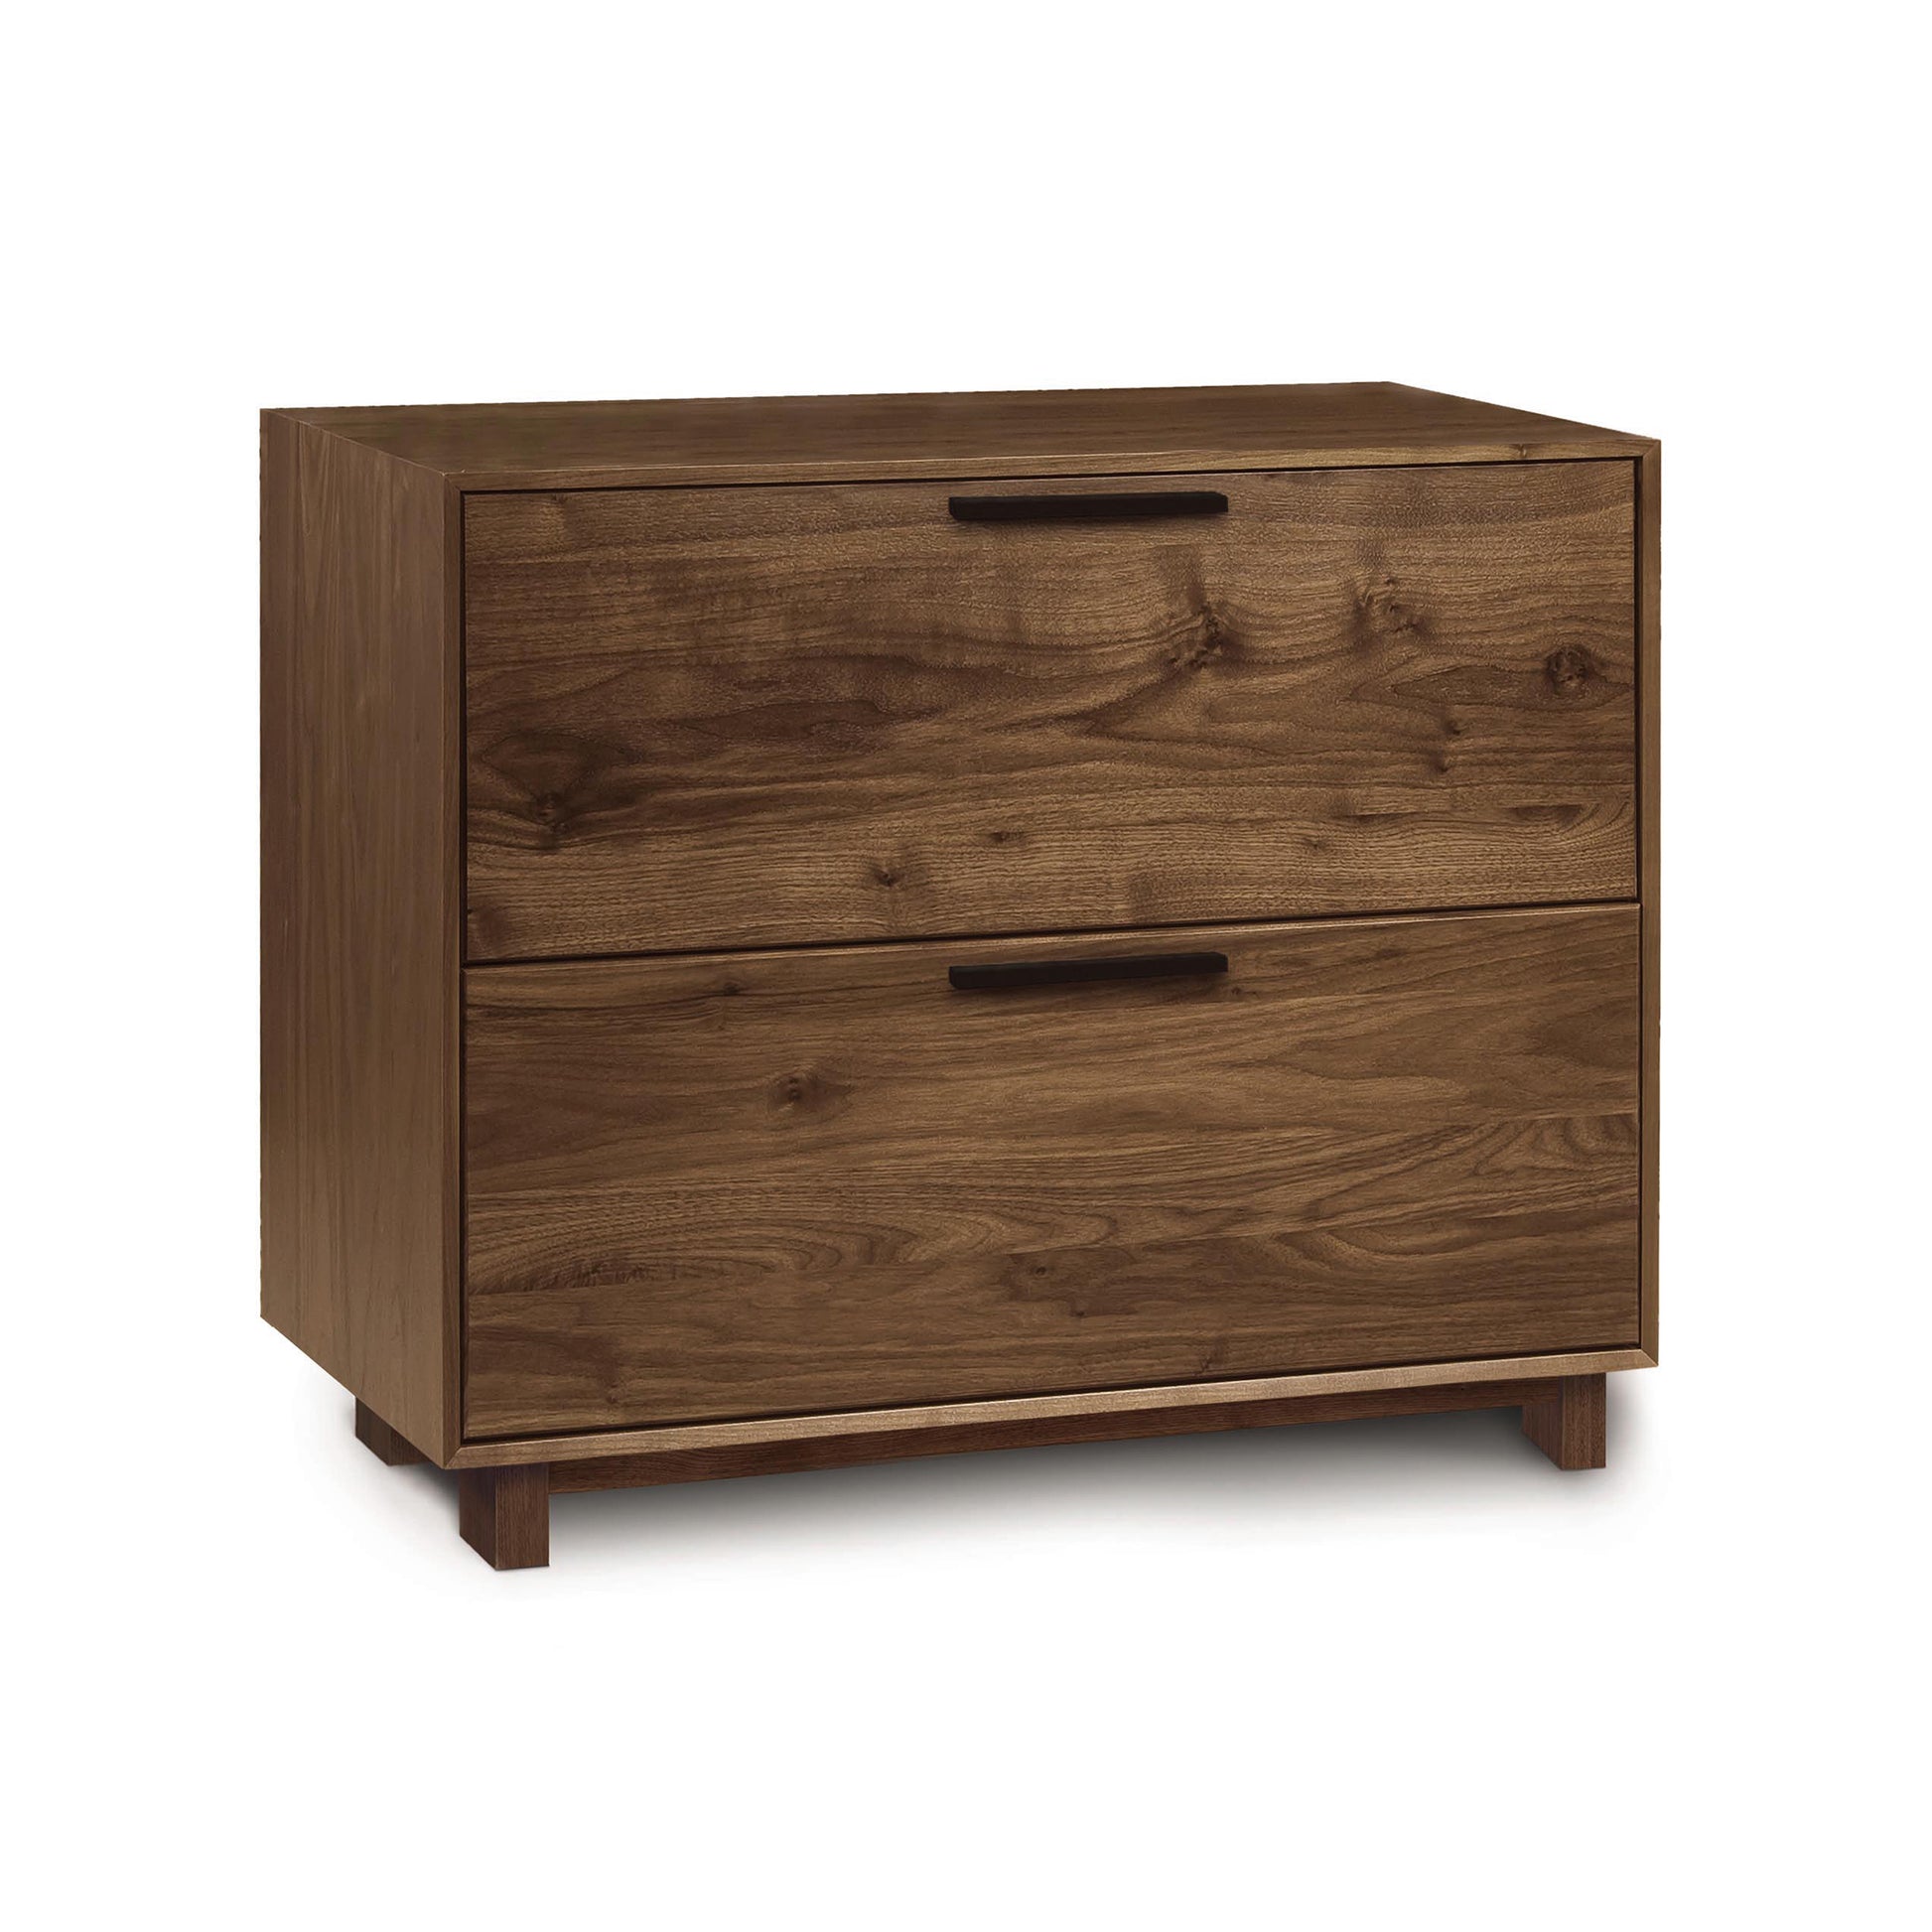 A sustainable hardwood construction two-drawer Copeland Furniture Linear Lateral File Cabinet on a white background.